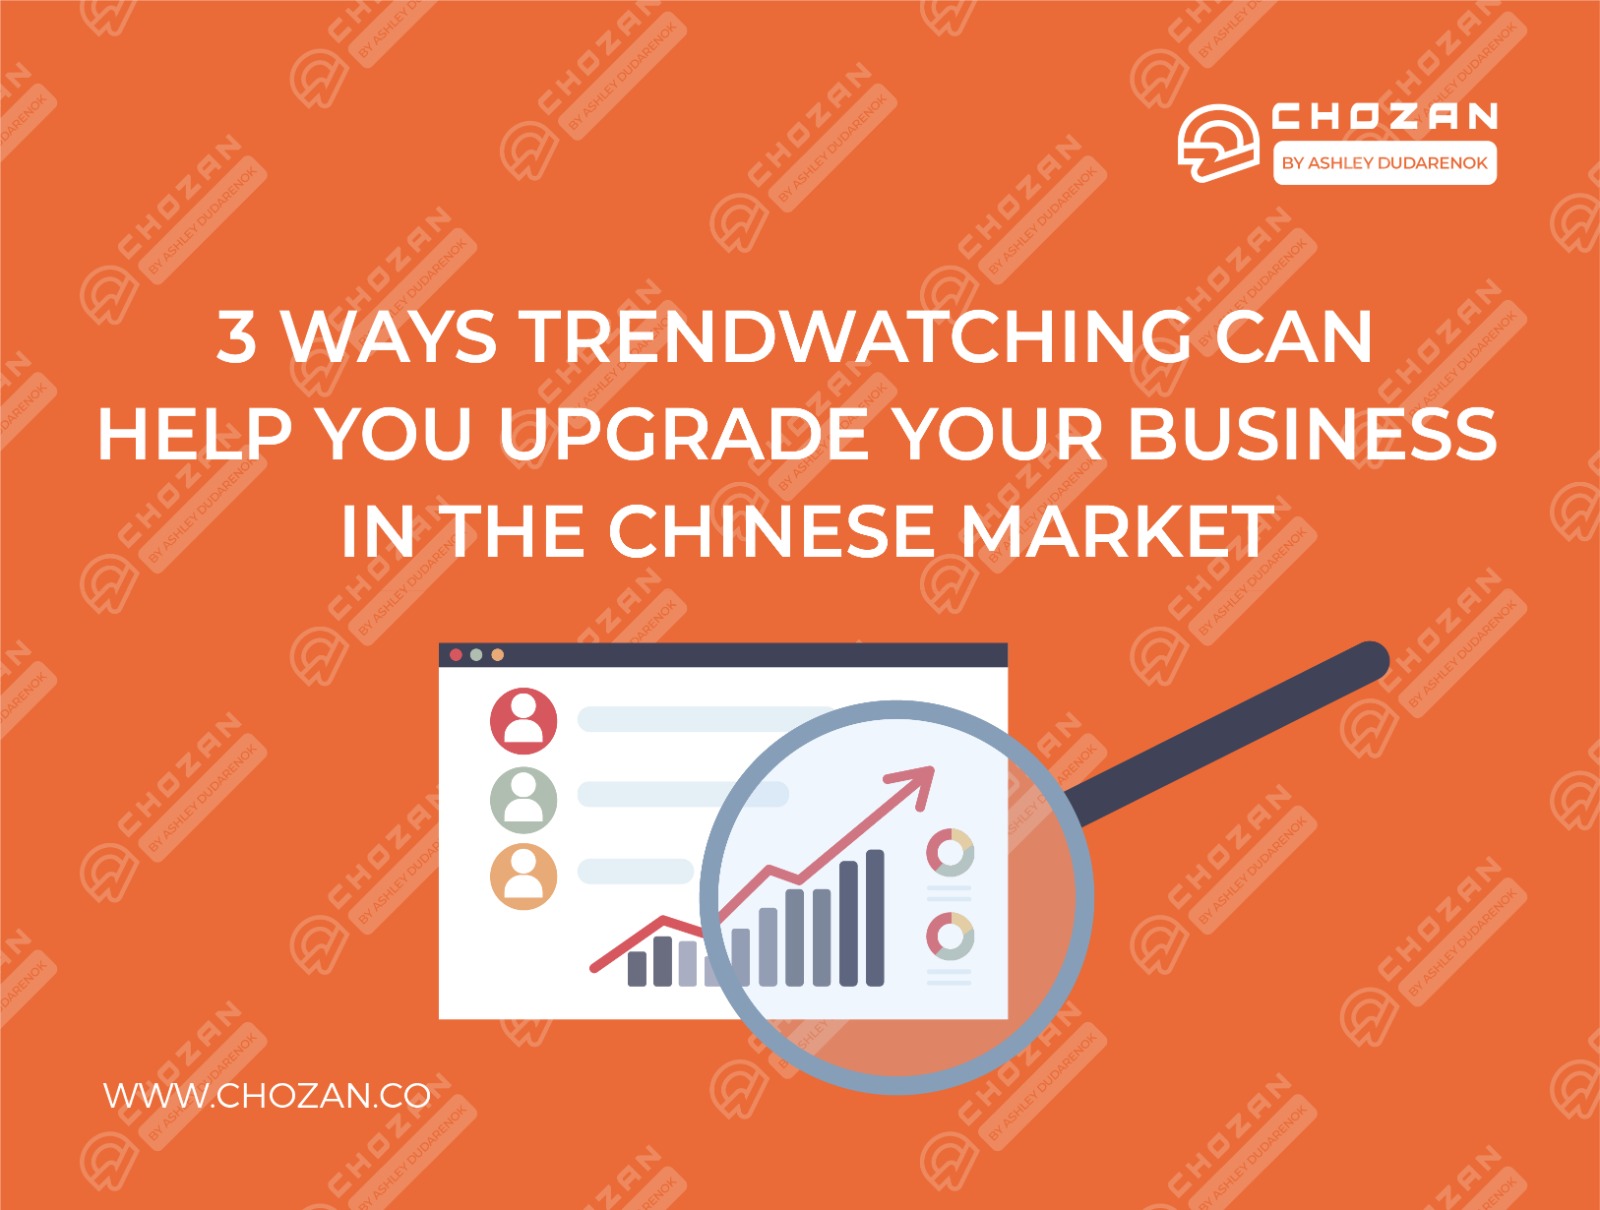 3 Ways Trendwatching Can Help You Upgrade Your Business In The Chinese Market